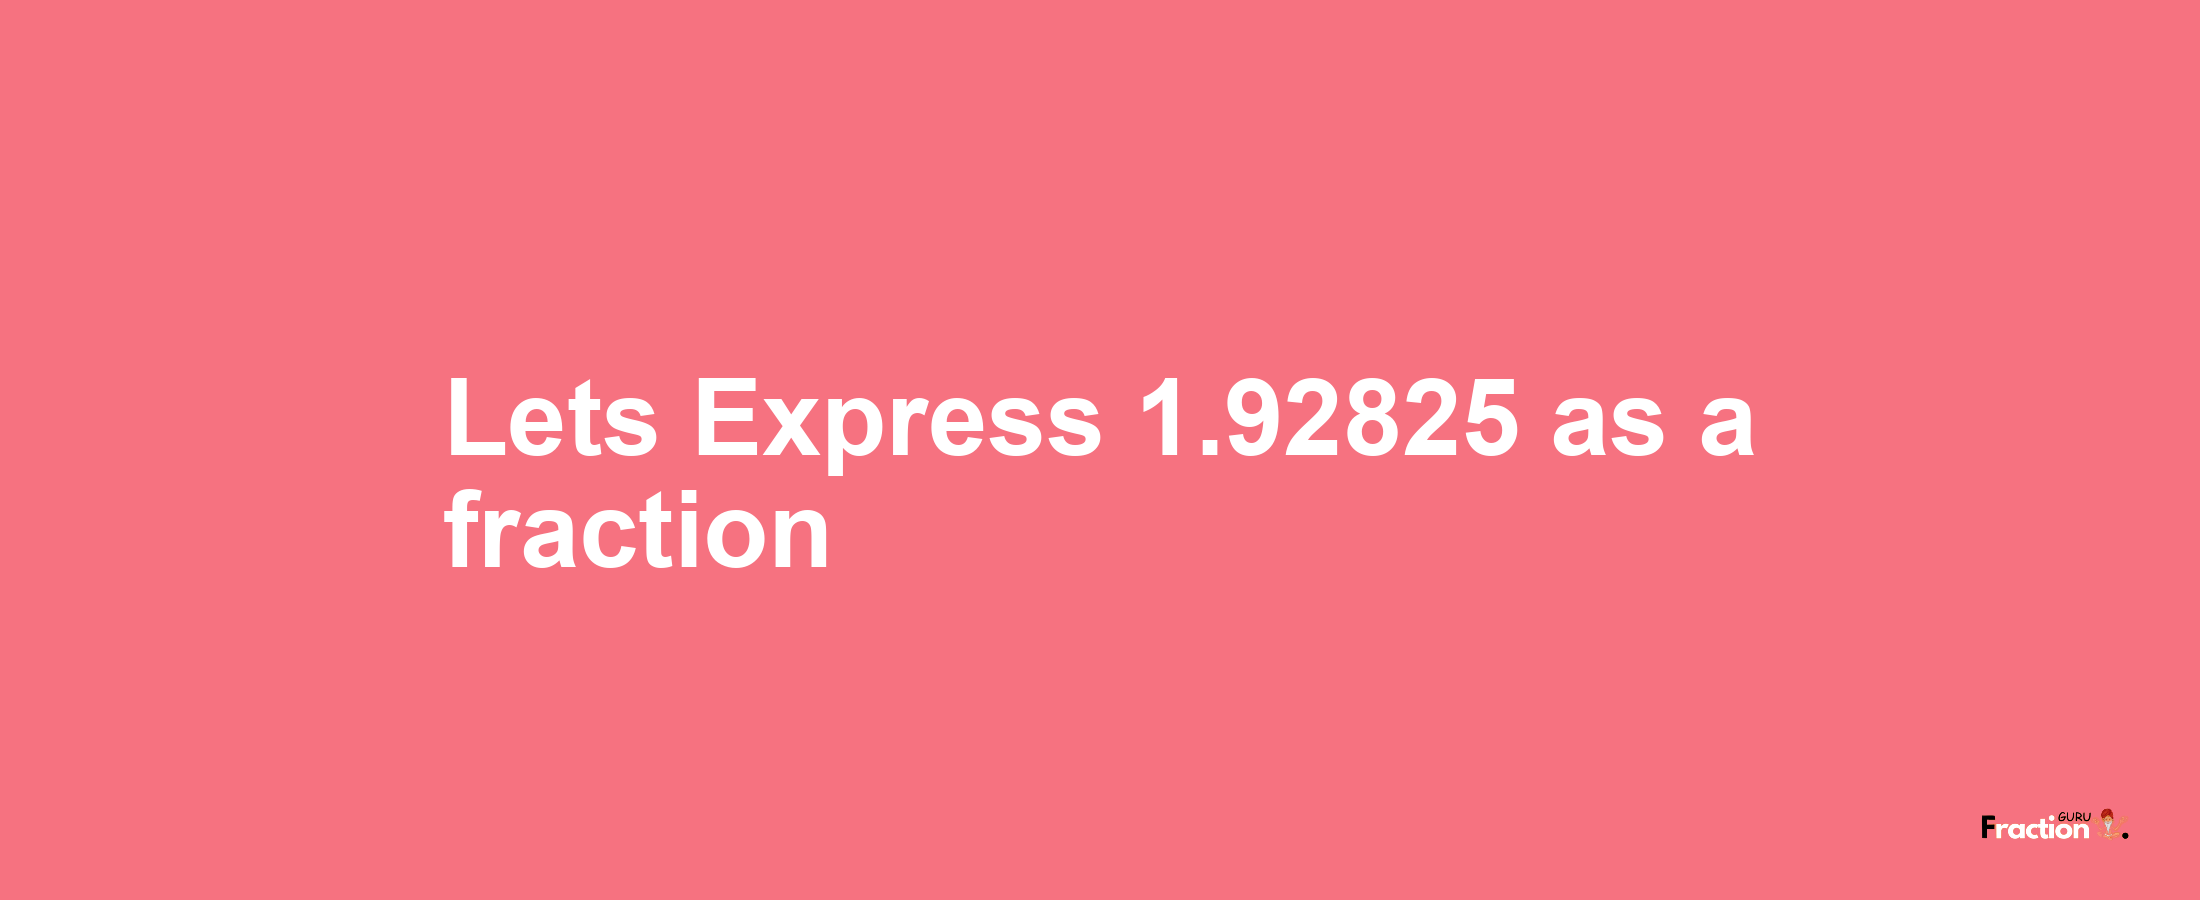 Lets Express 1.92825 as afraction